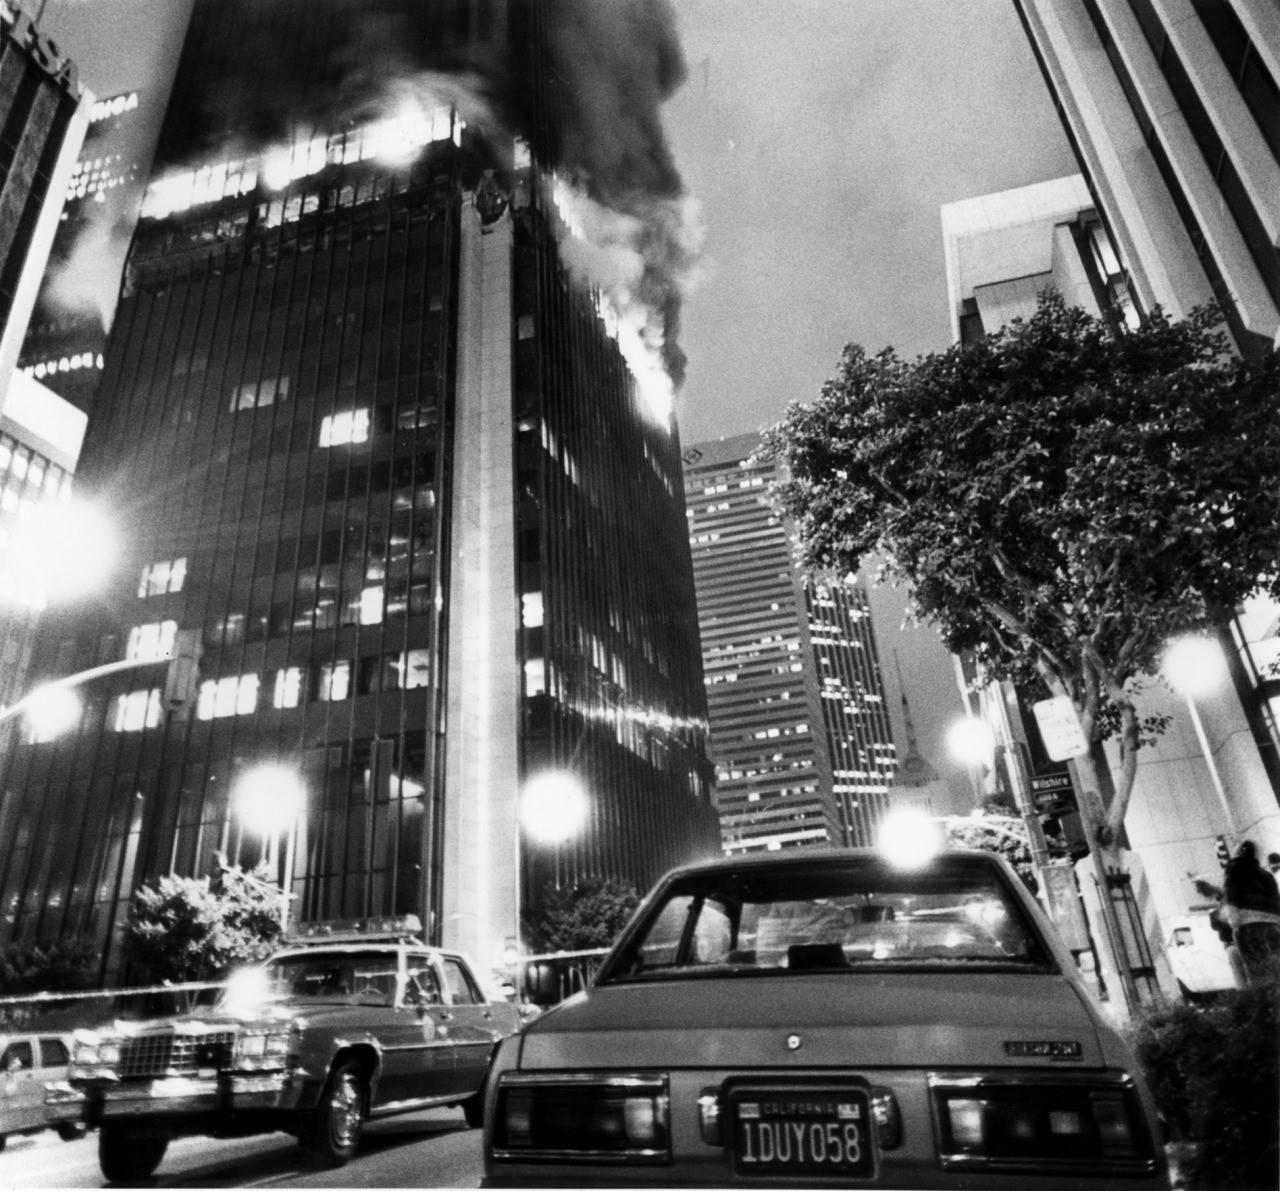 The First Interstate Tower ablaze in flames, 1988